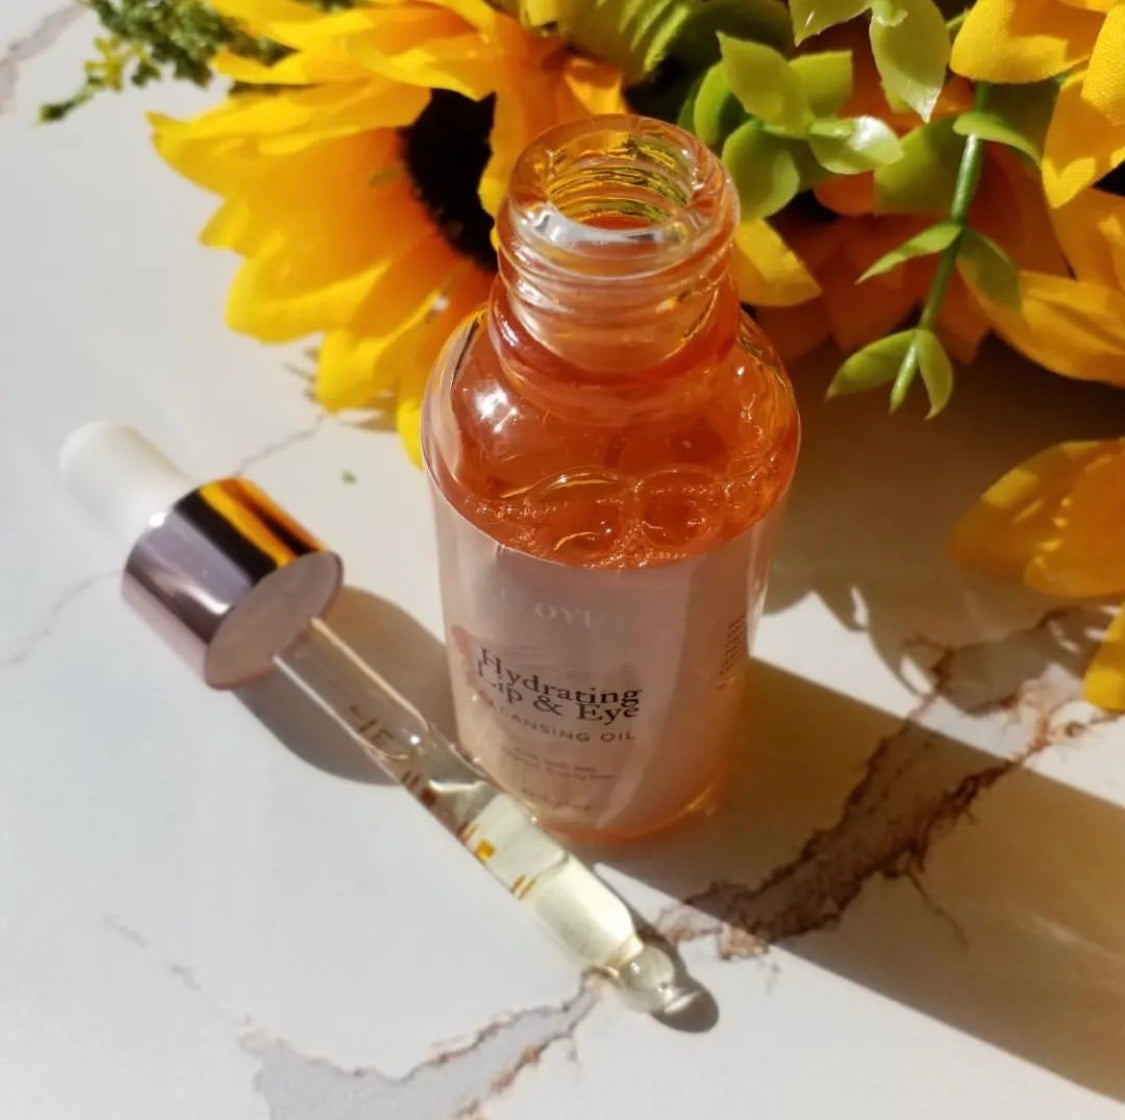 Hydrating Lip & Eye Make-Up Cleansing Oil